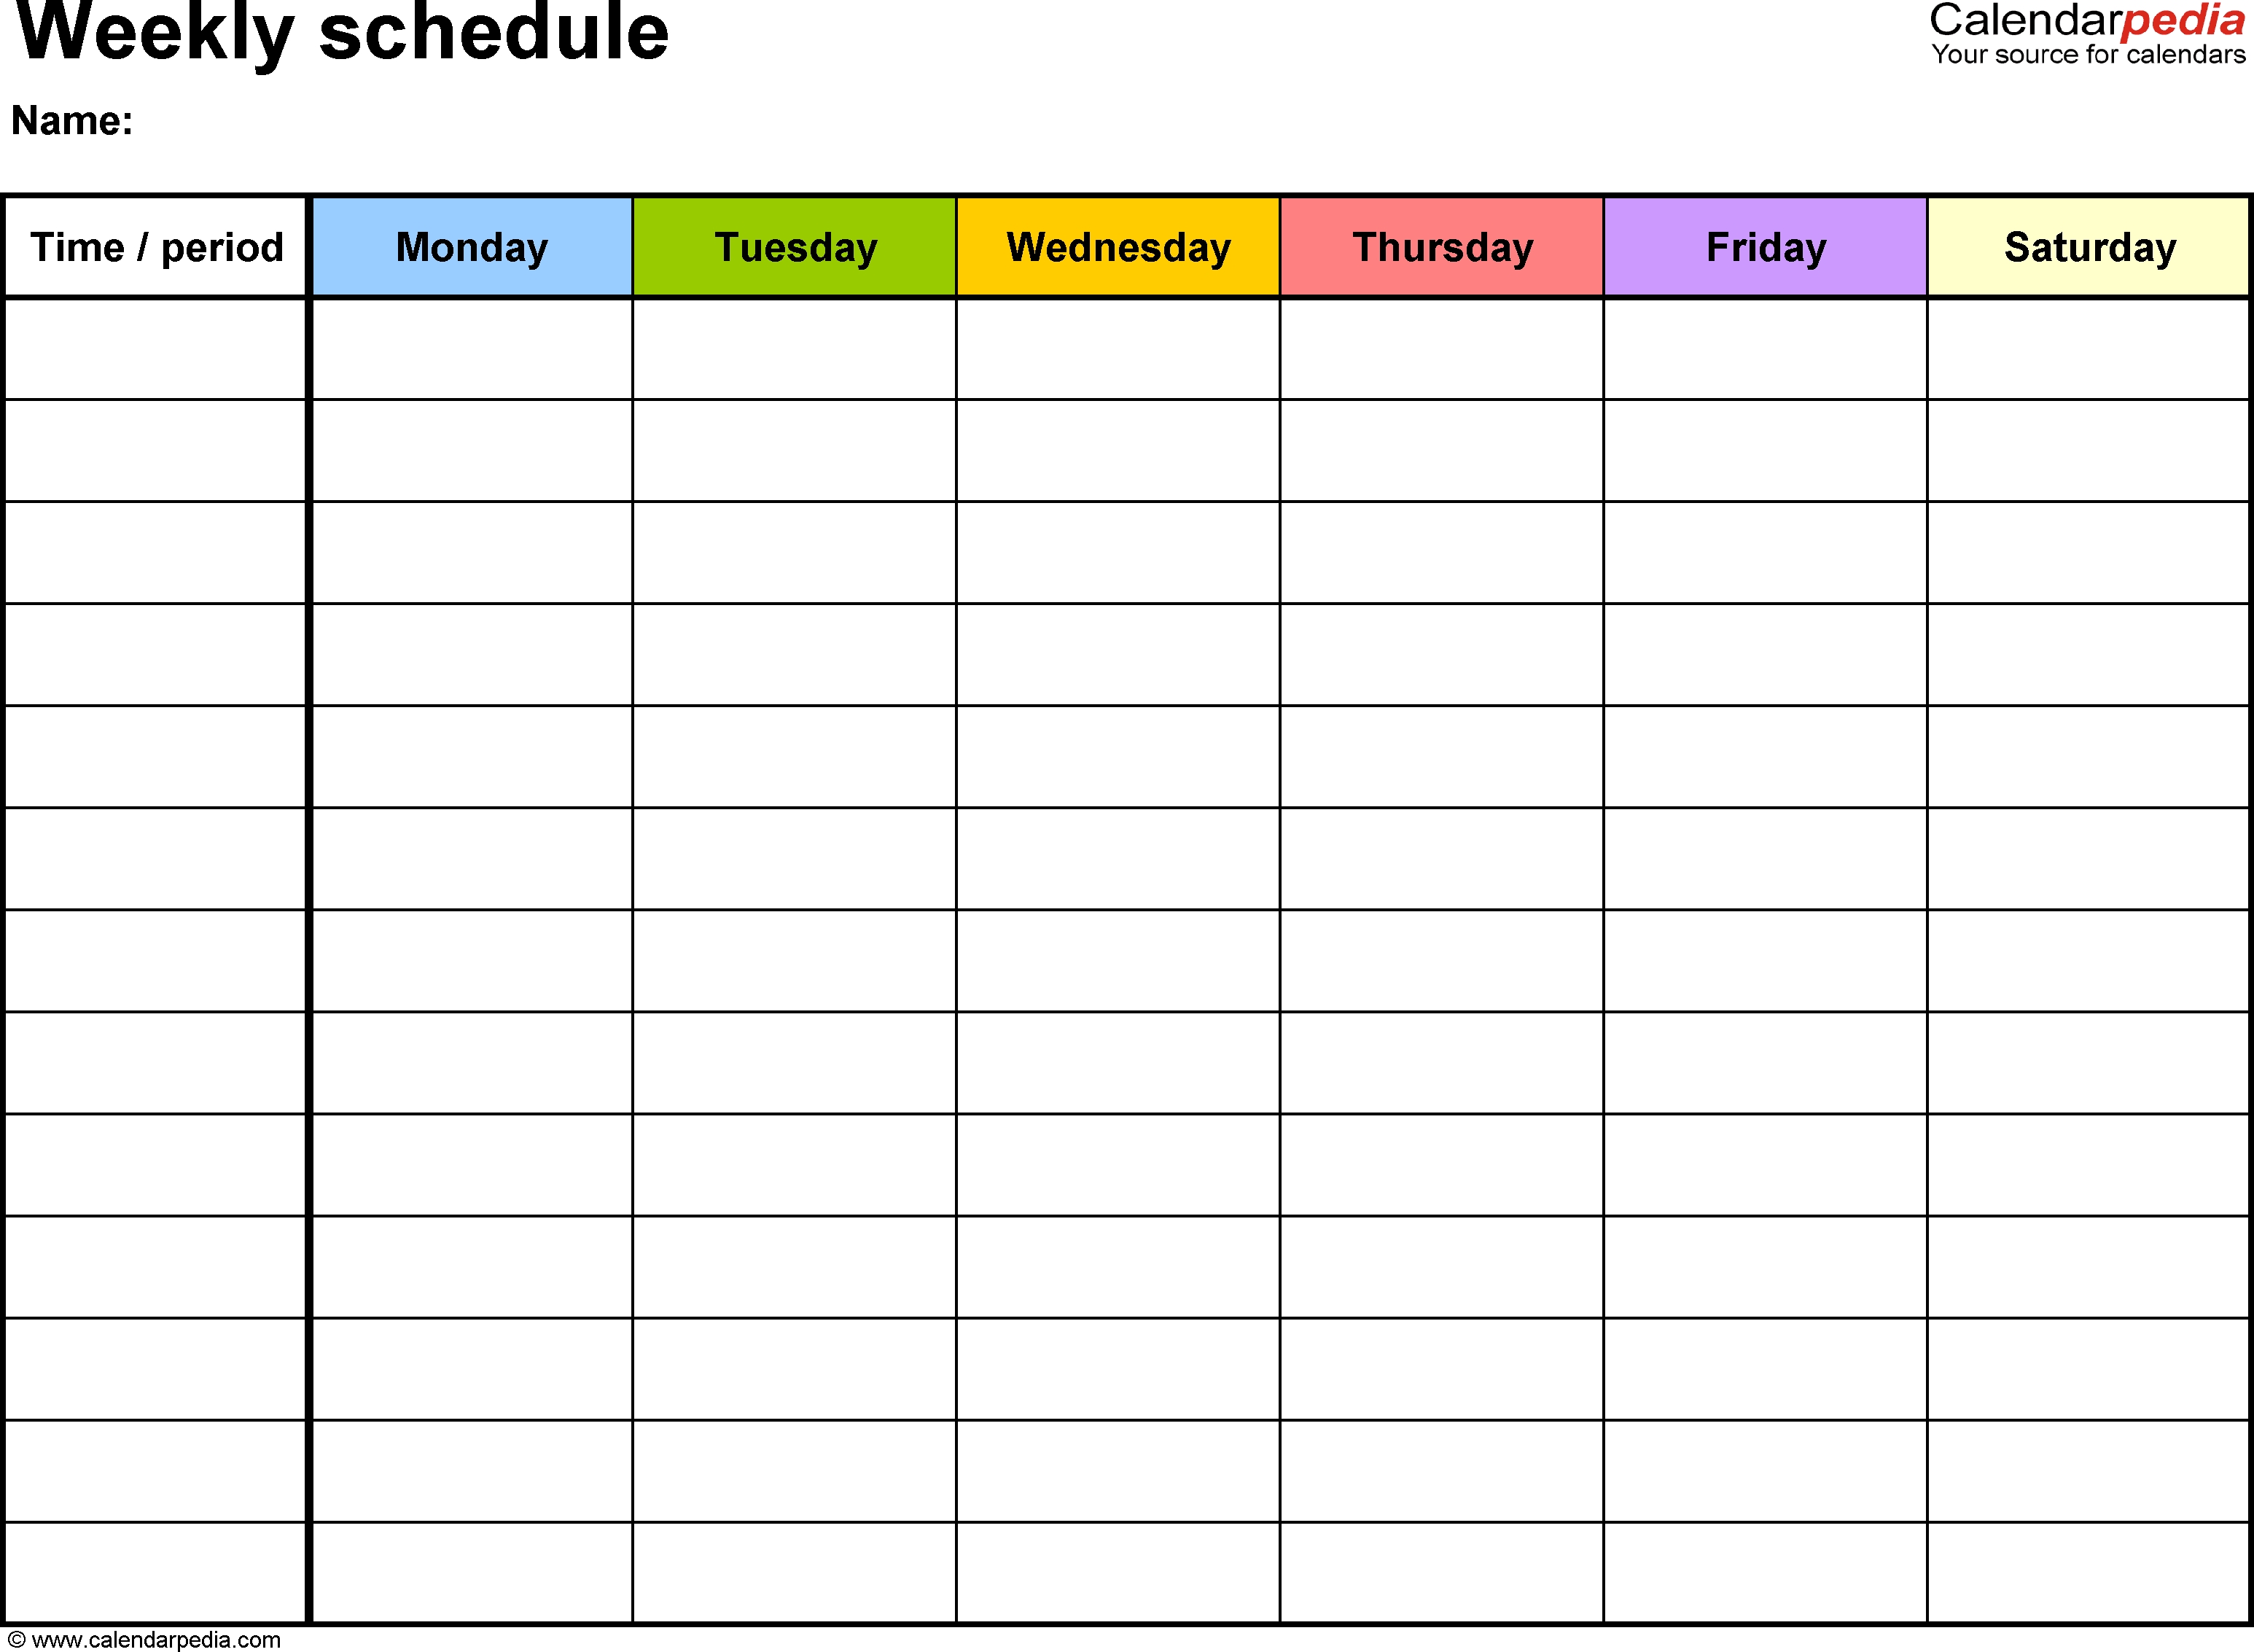 Free Weekly Schedule Templates For Word - 18 Templates-Weekly Calendar Template Monday To Friday